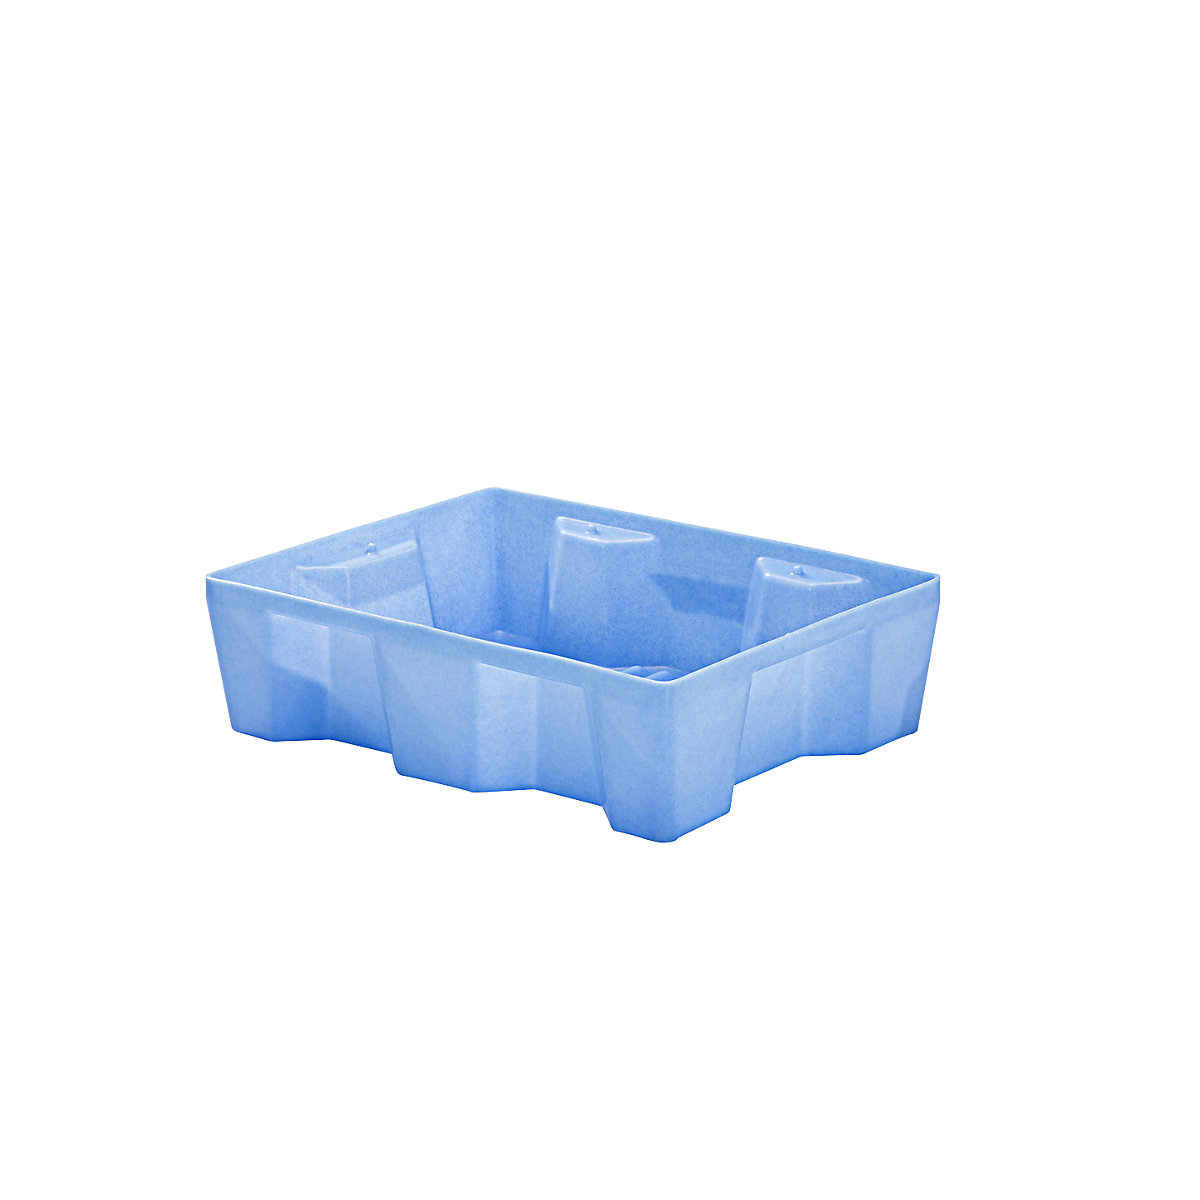 PE tray for 60 l drums and small containers